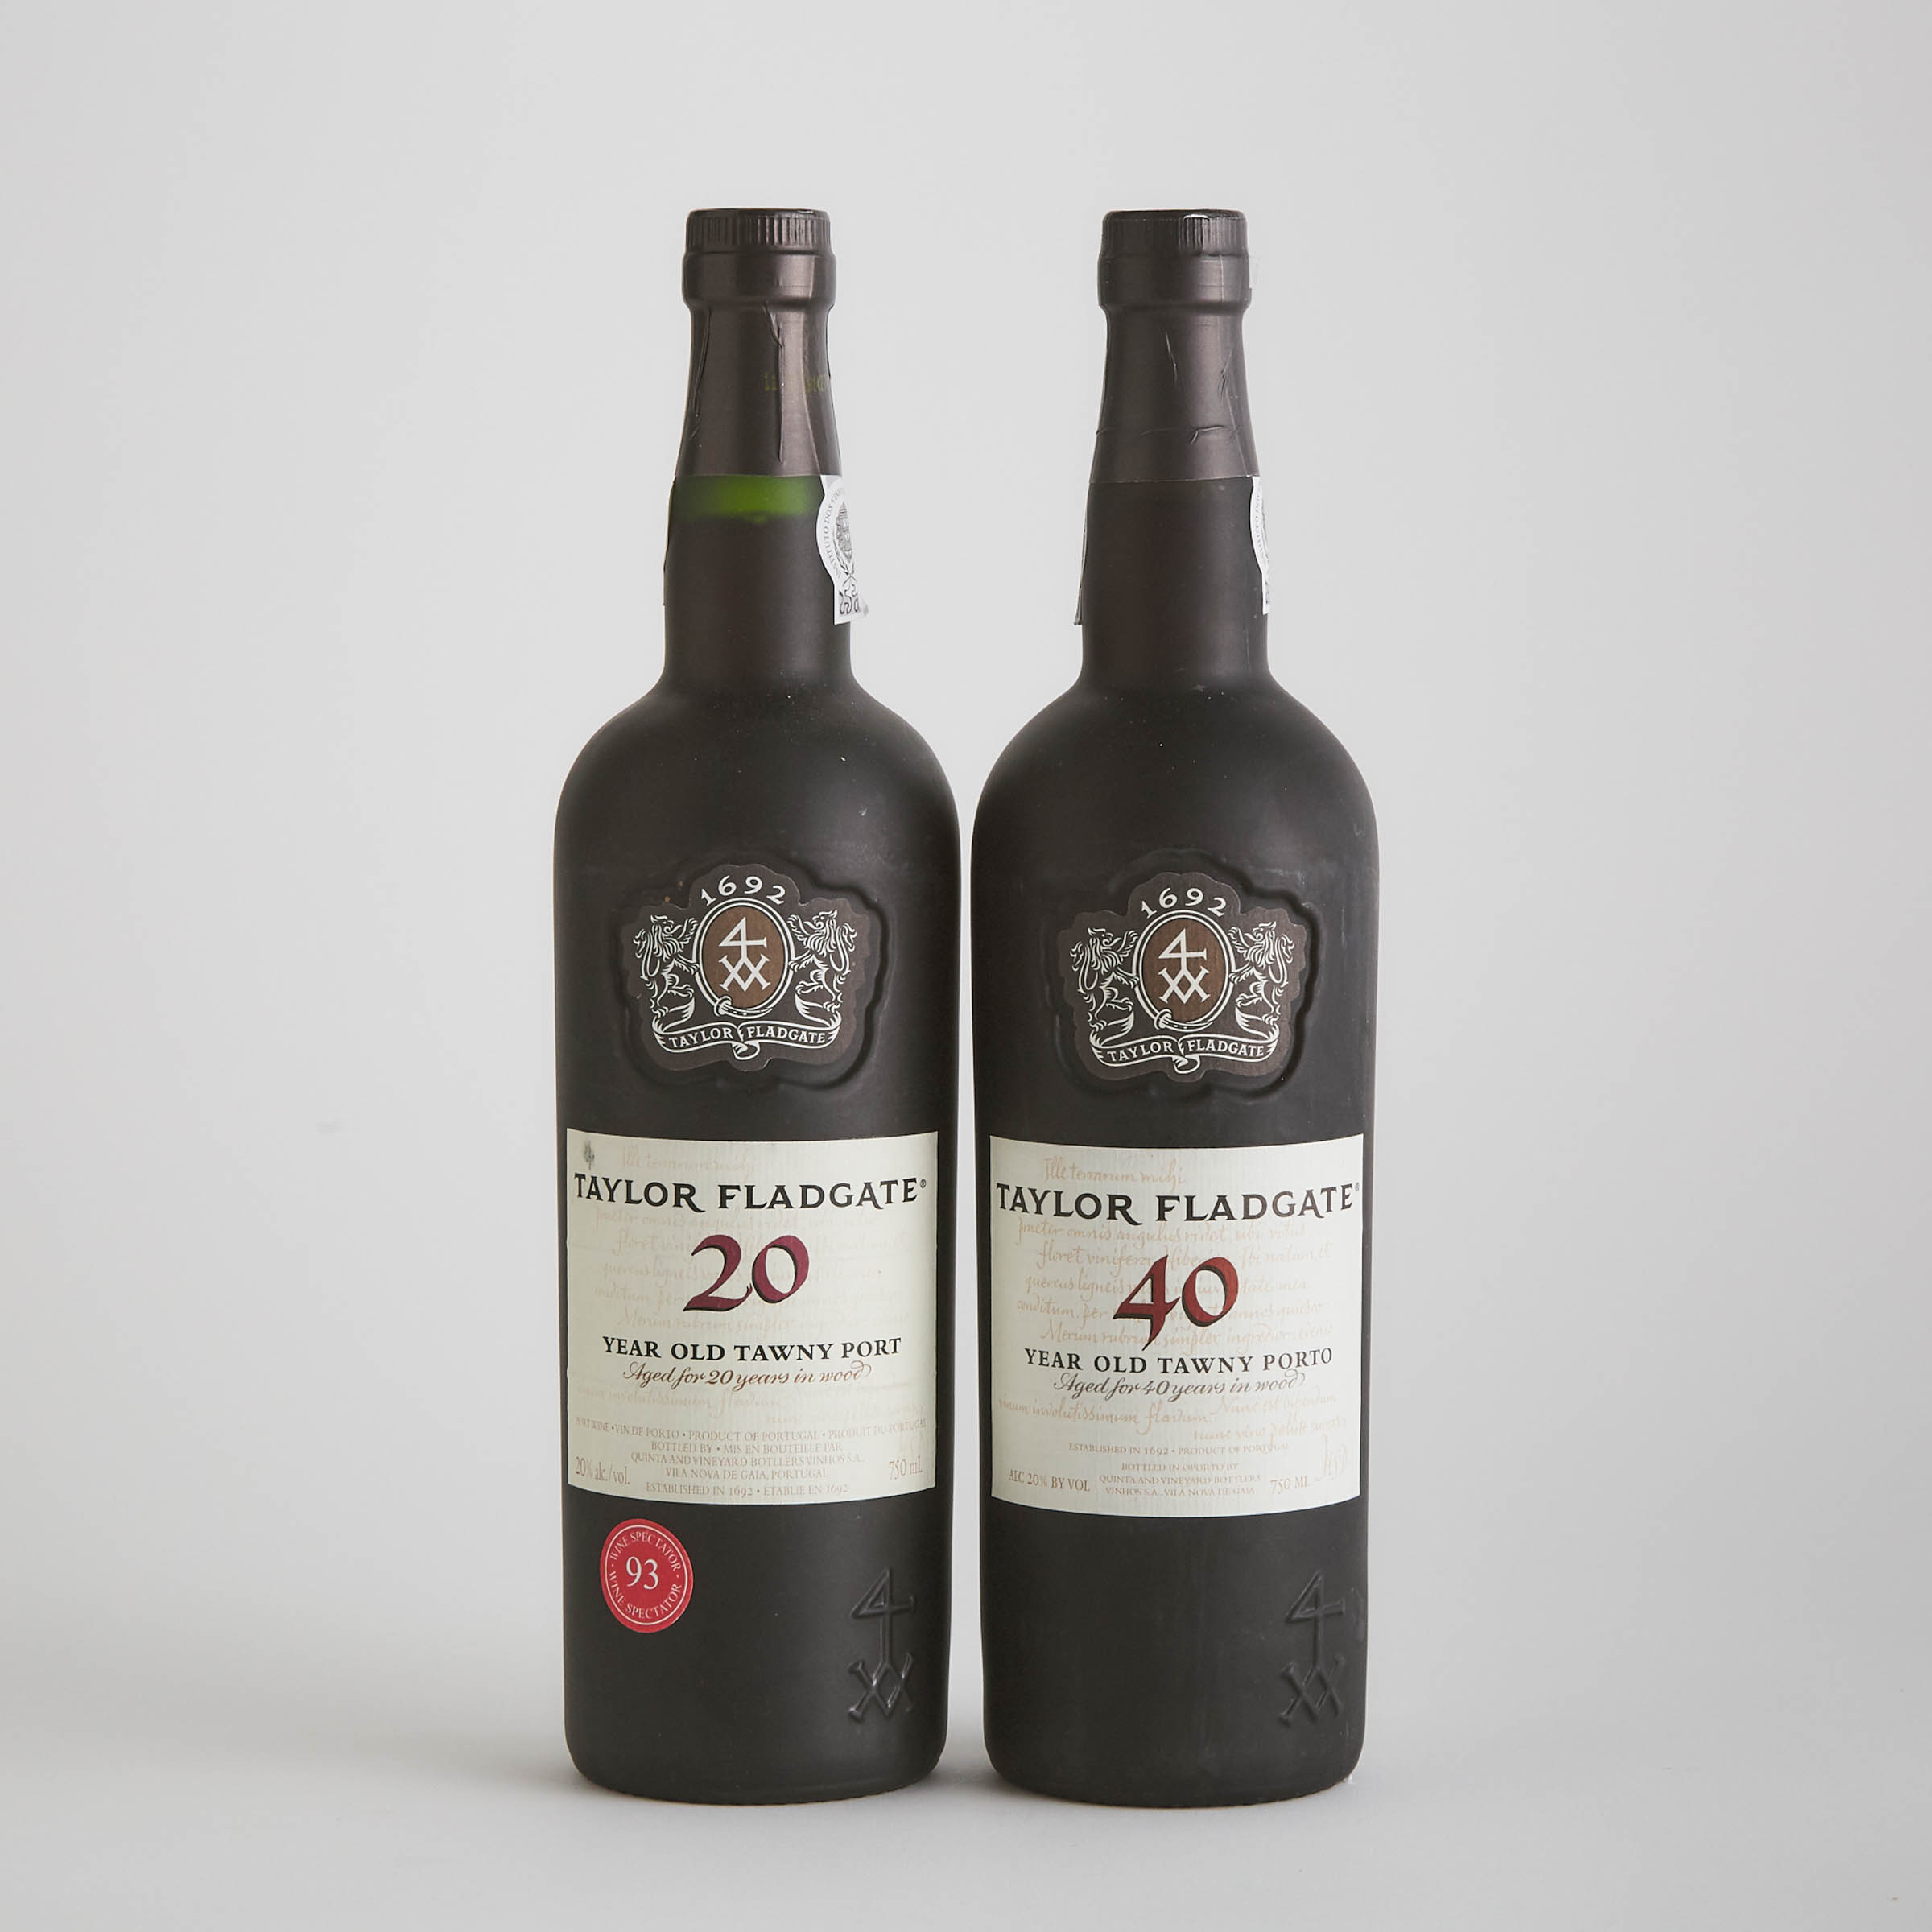 TAYLOR FLADGATE 20 YEAR OLD TAWNY PORT  (1)
TAYLOR FLADGATE 40 YEAR OLD TAWNY PORT  (1)